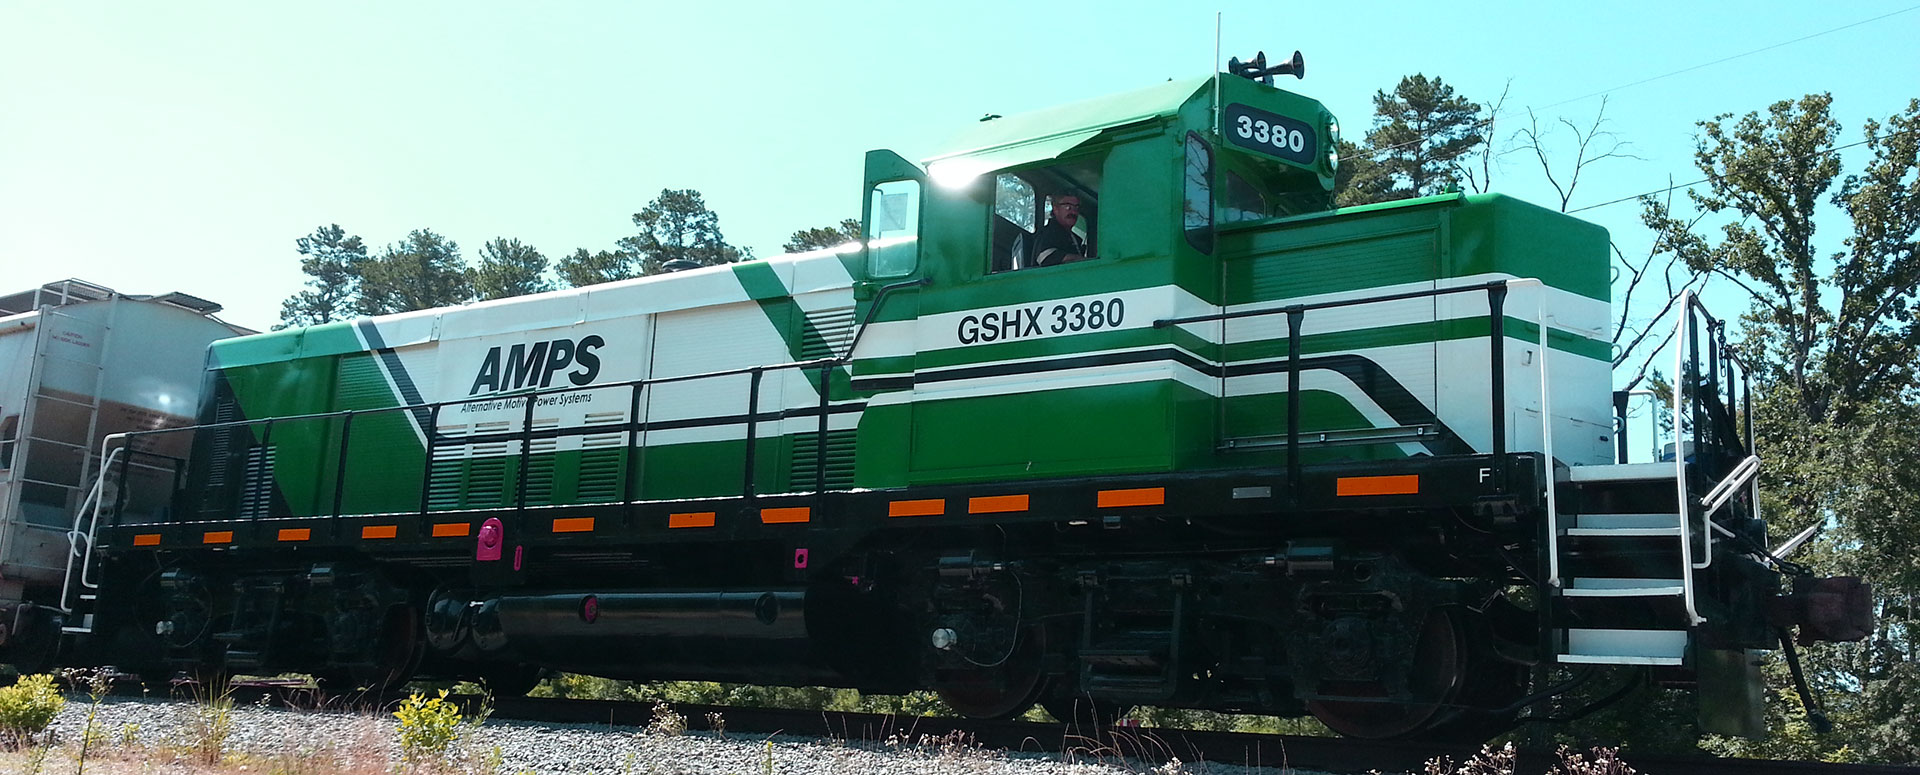 AMPS Genset Hybrid Locomotive reduces CO and PM emissions by over 99.9%